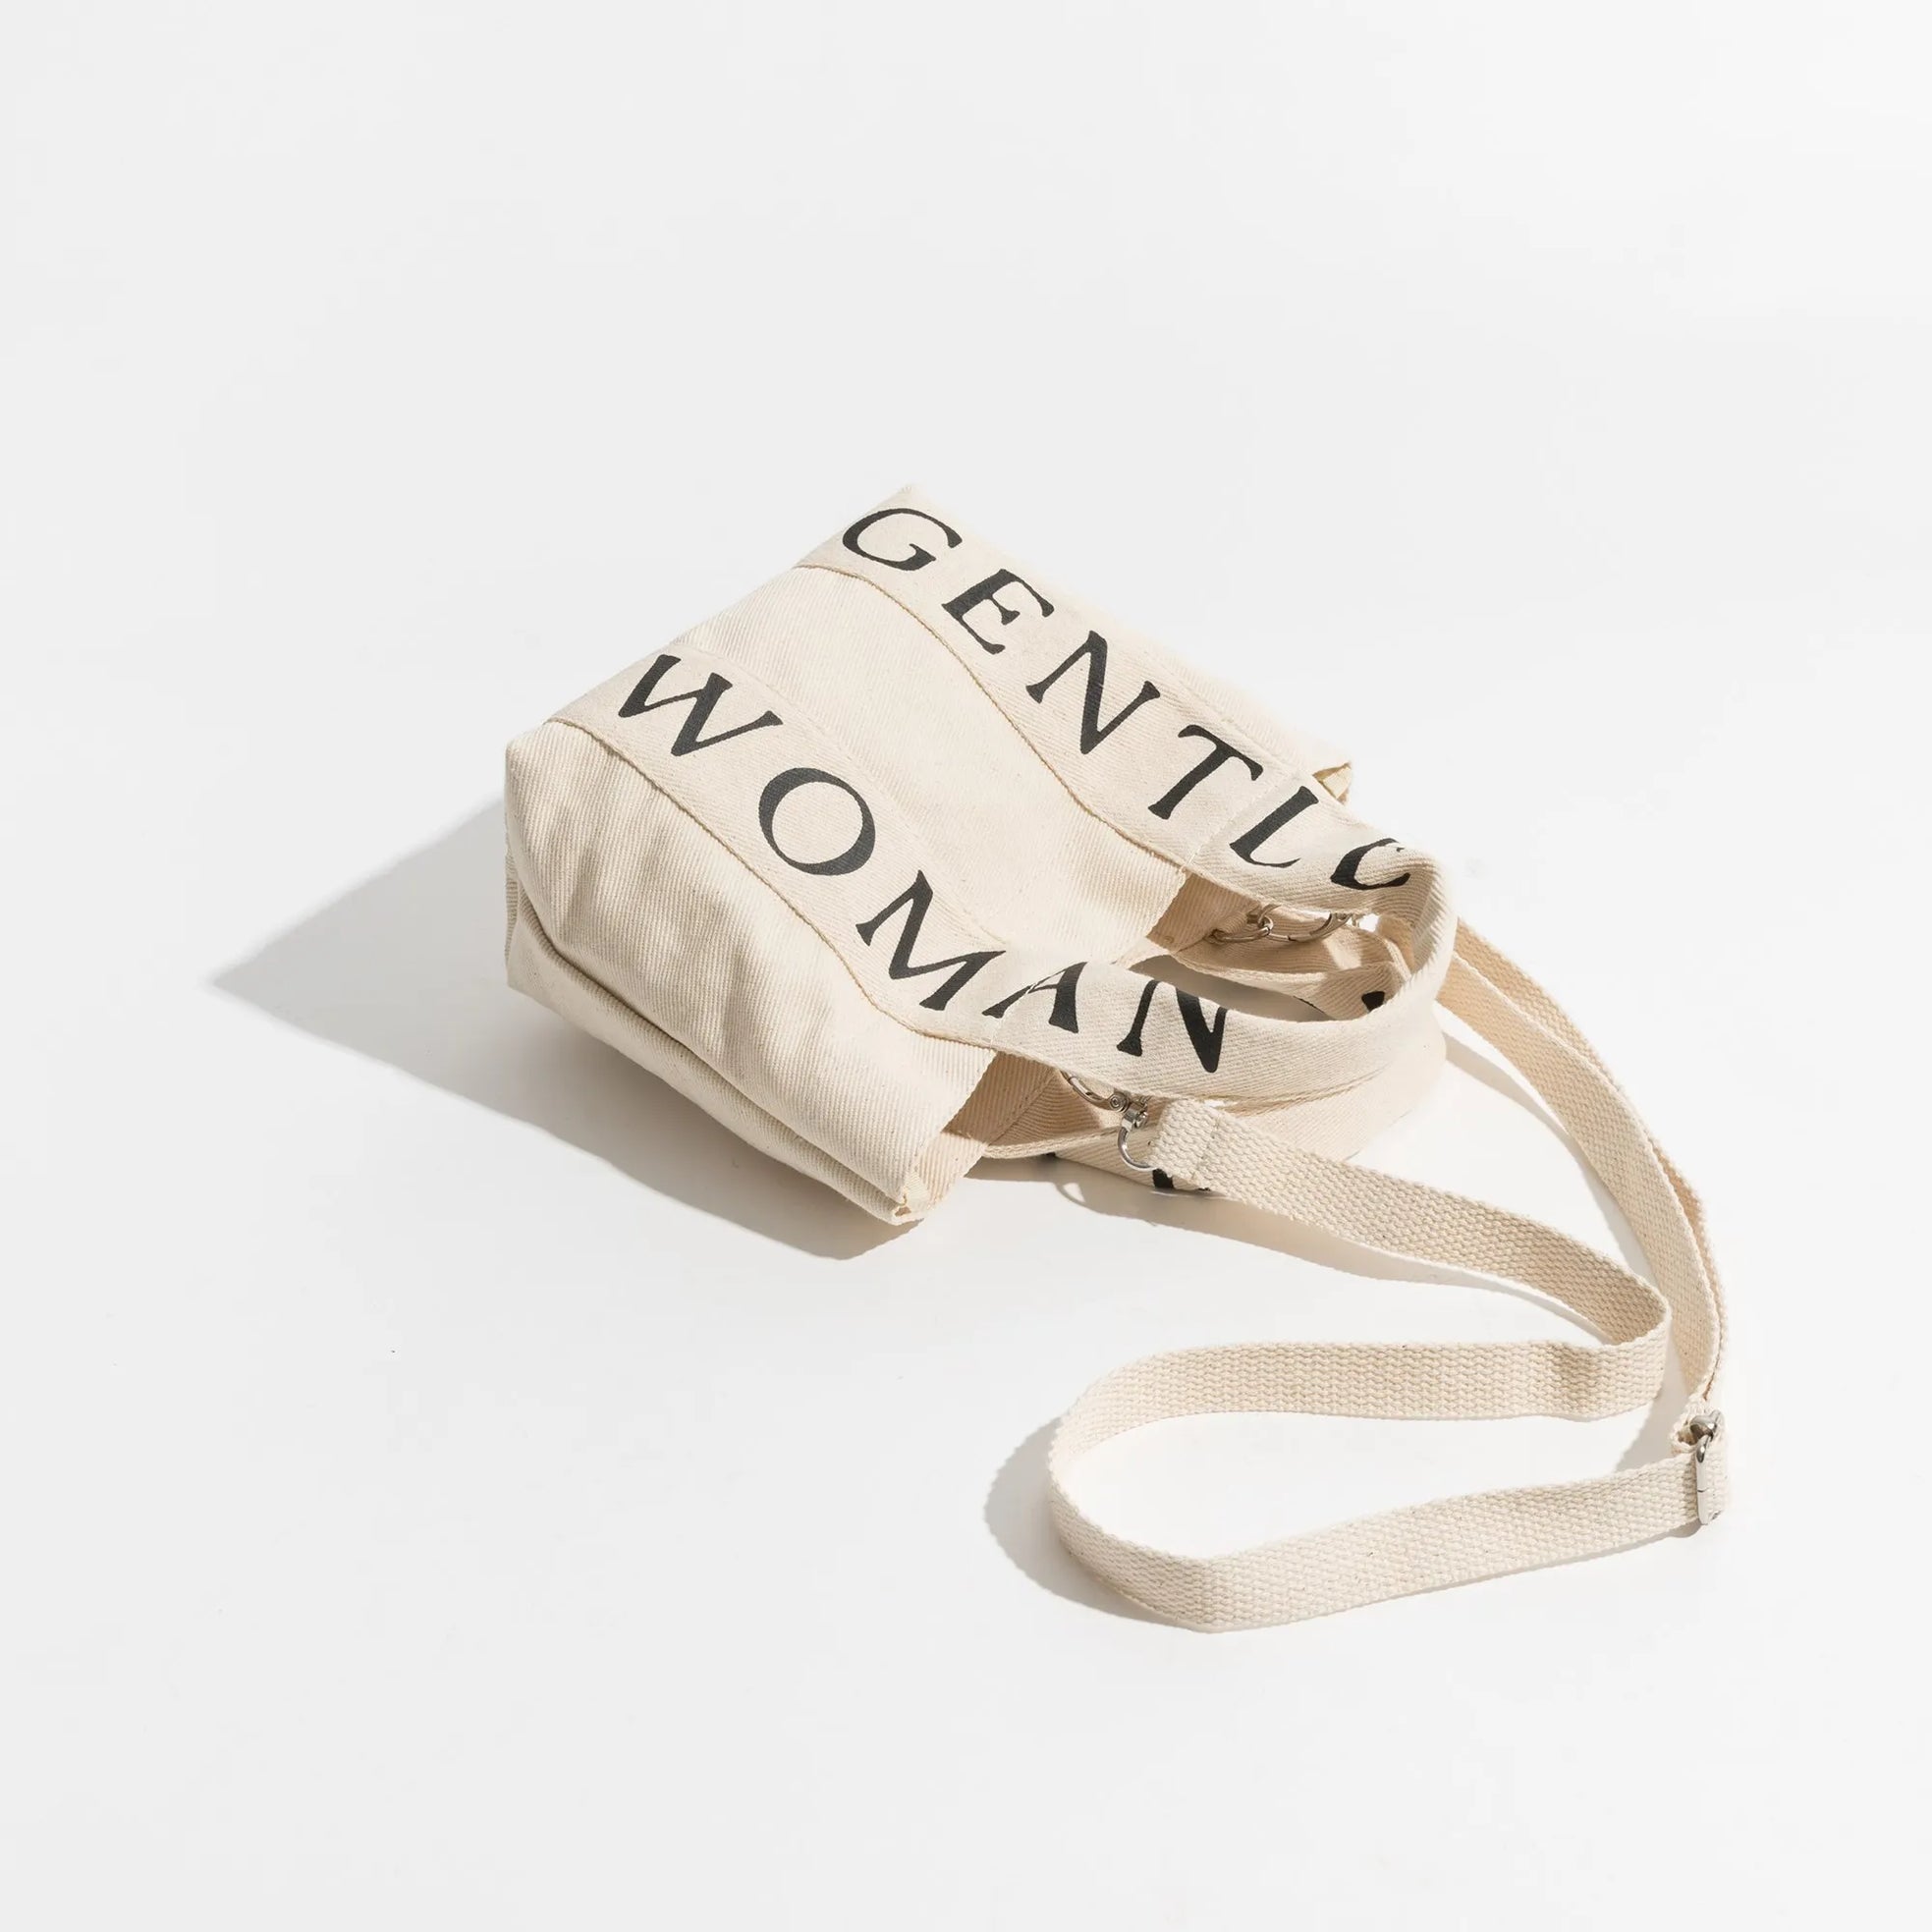 Gentle Woman Small  Aesthetic Canvas Tote Bag